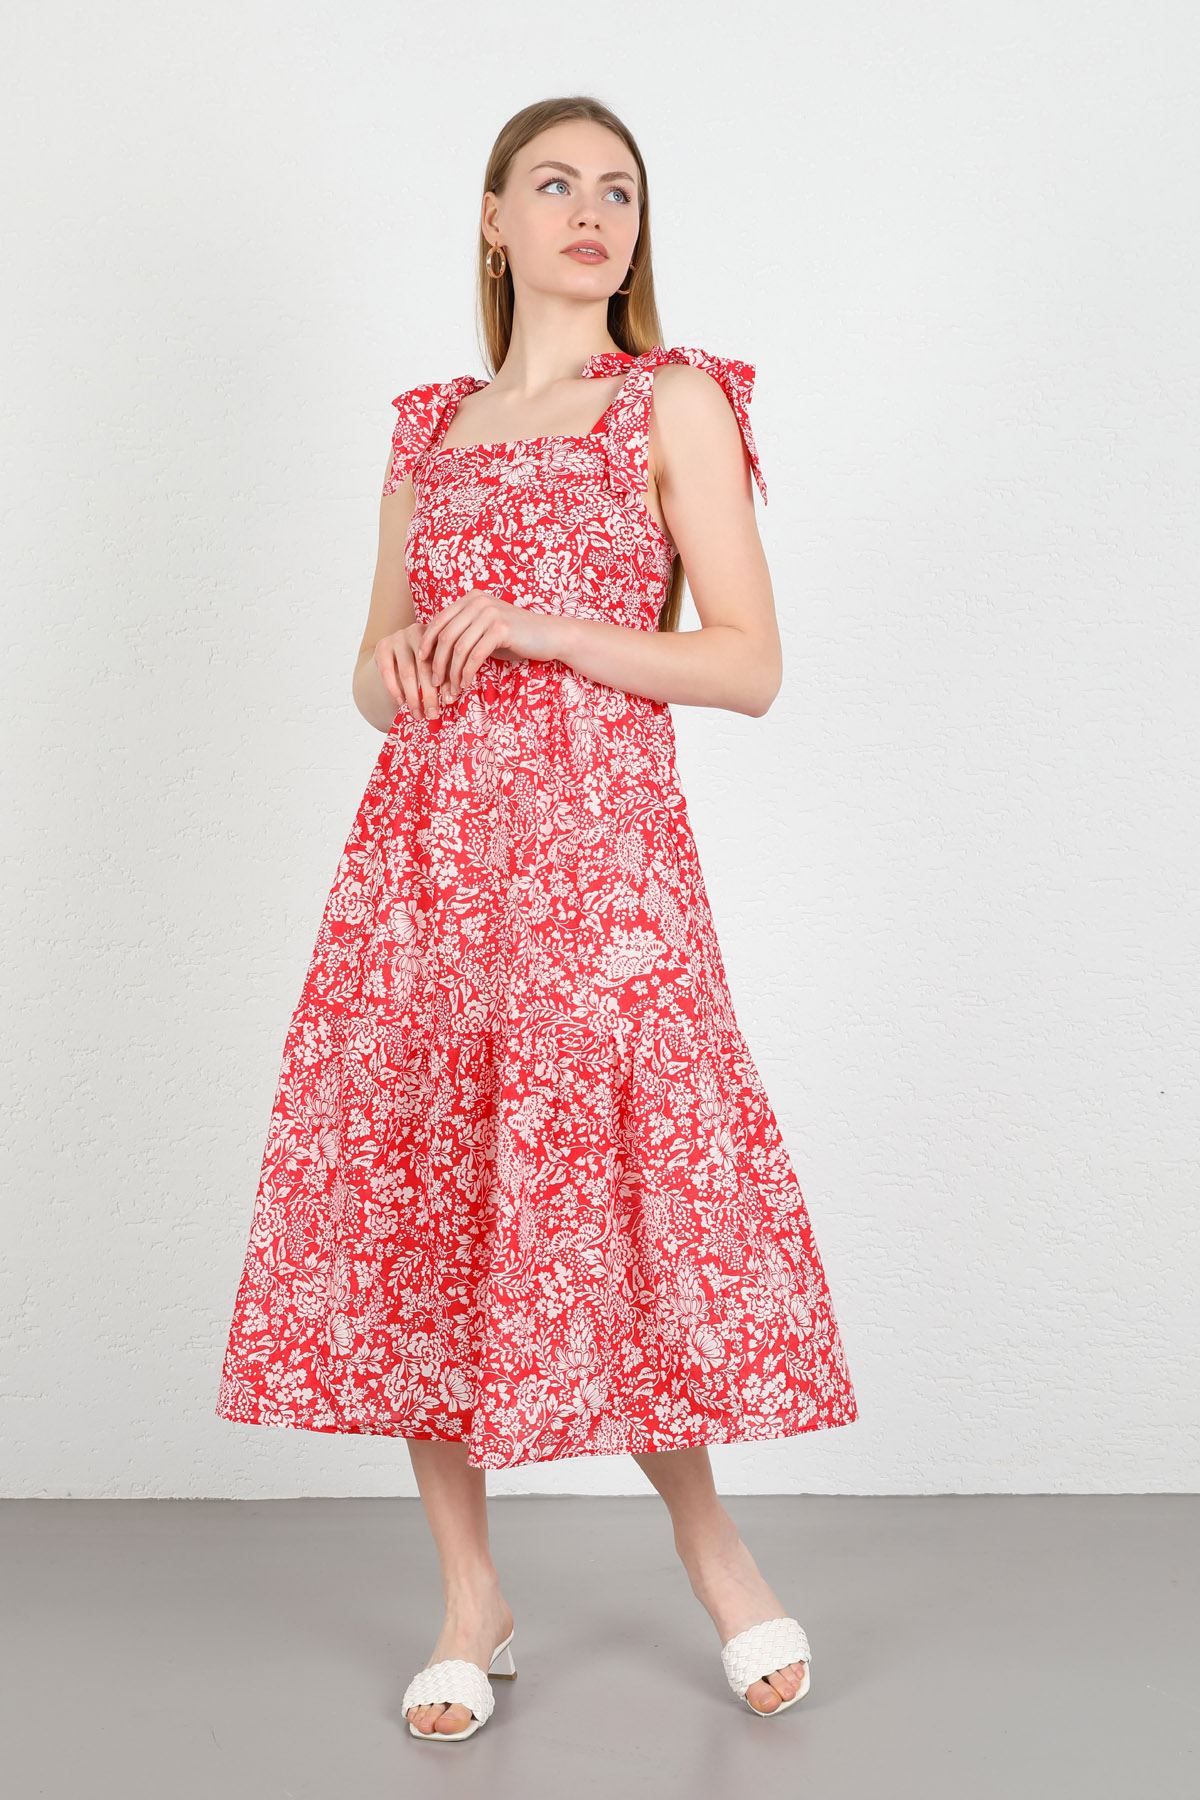 Vual Fabric Square Neck Floral Print Tied Shoulder Women Dress - Red